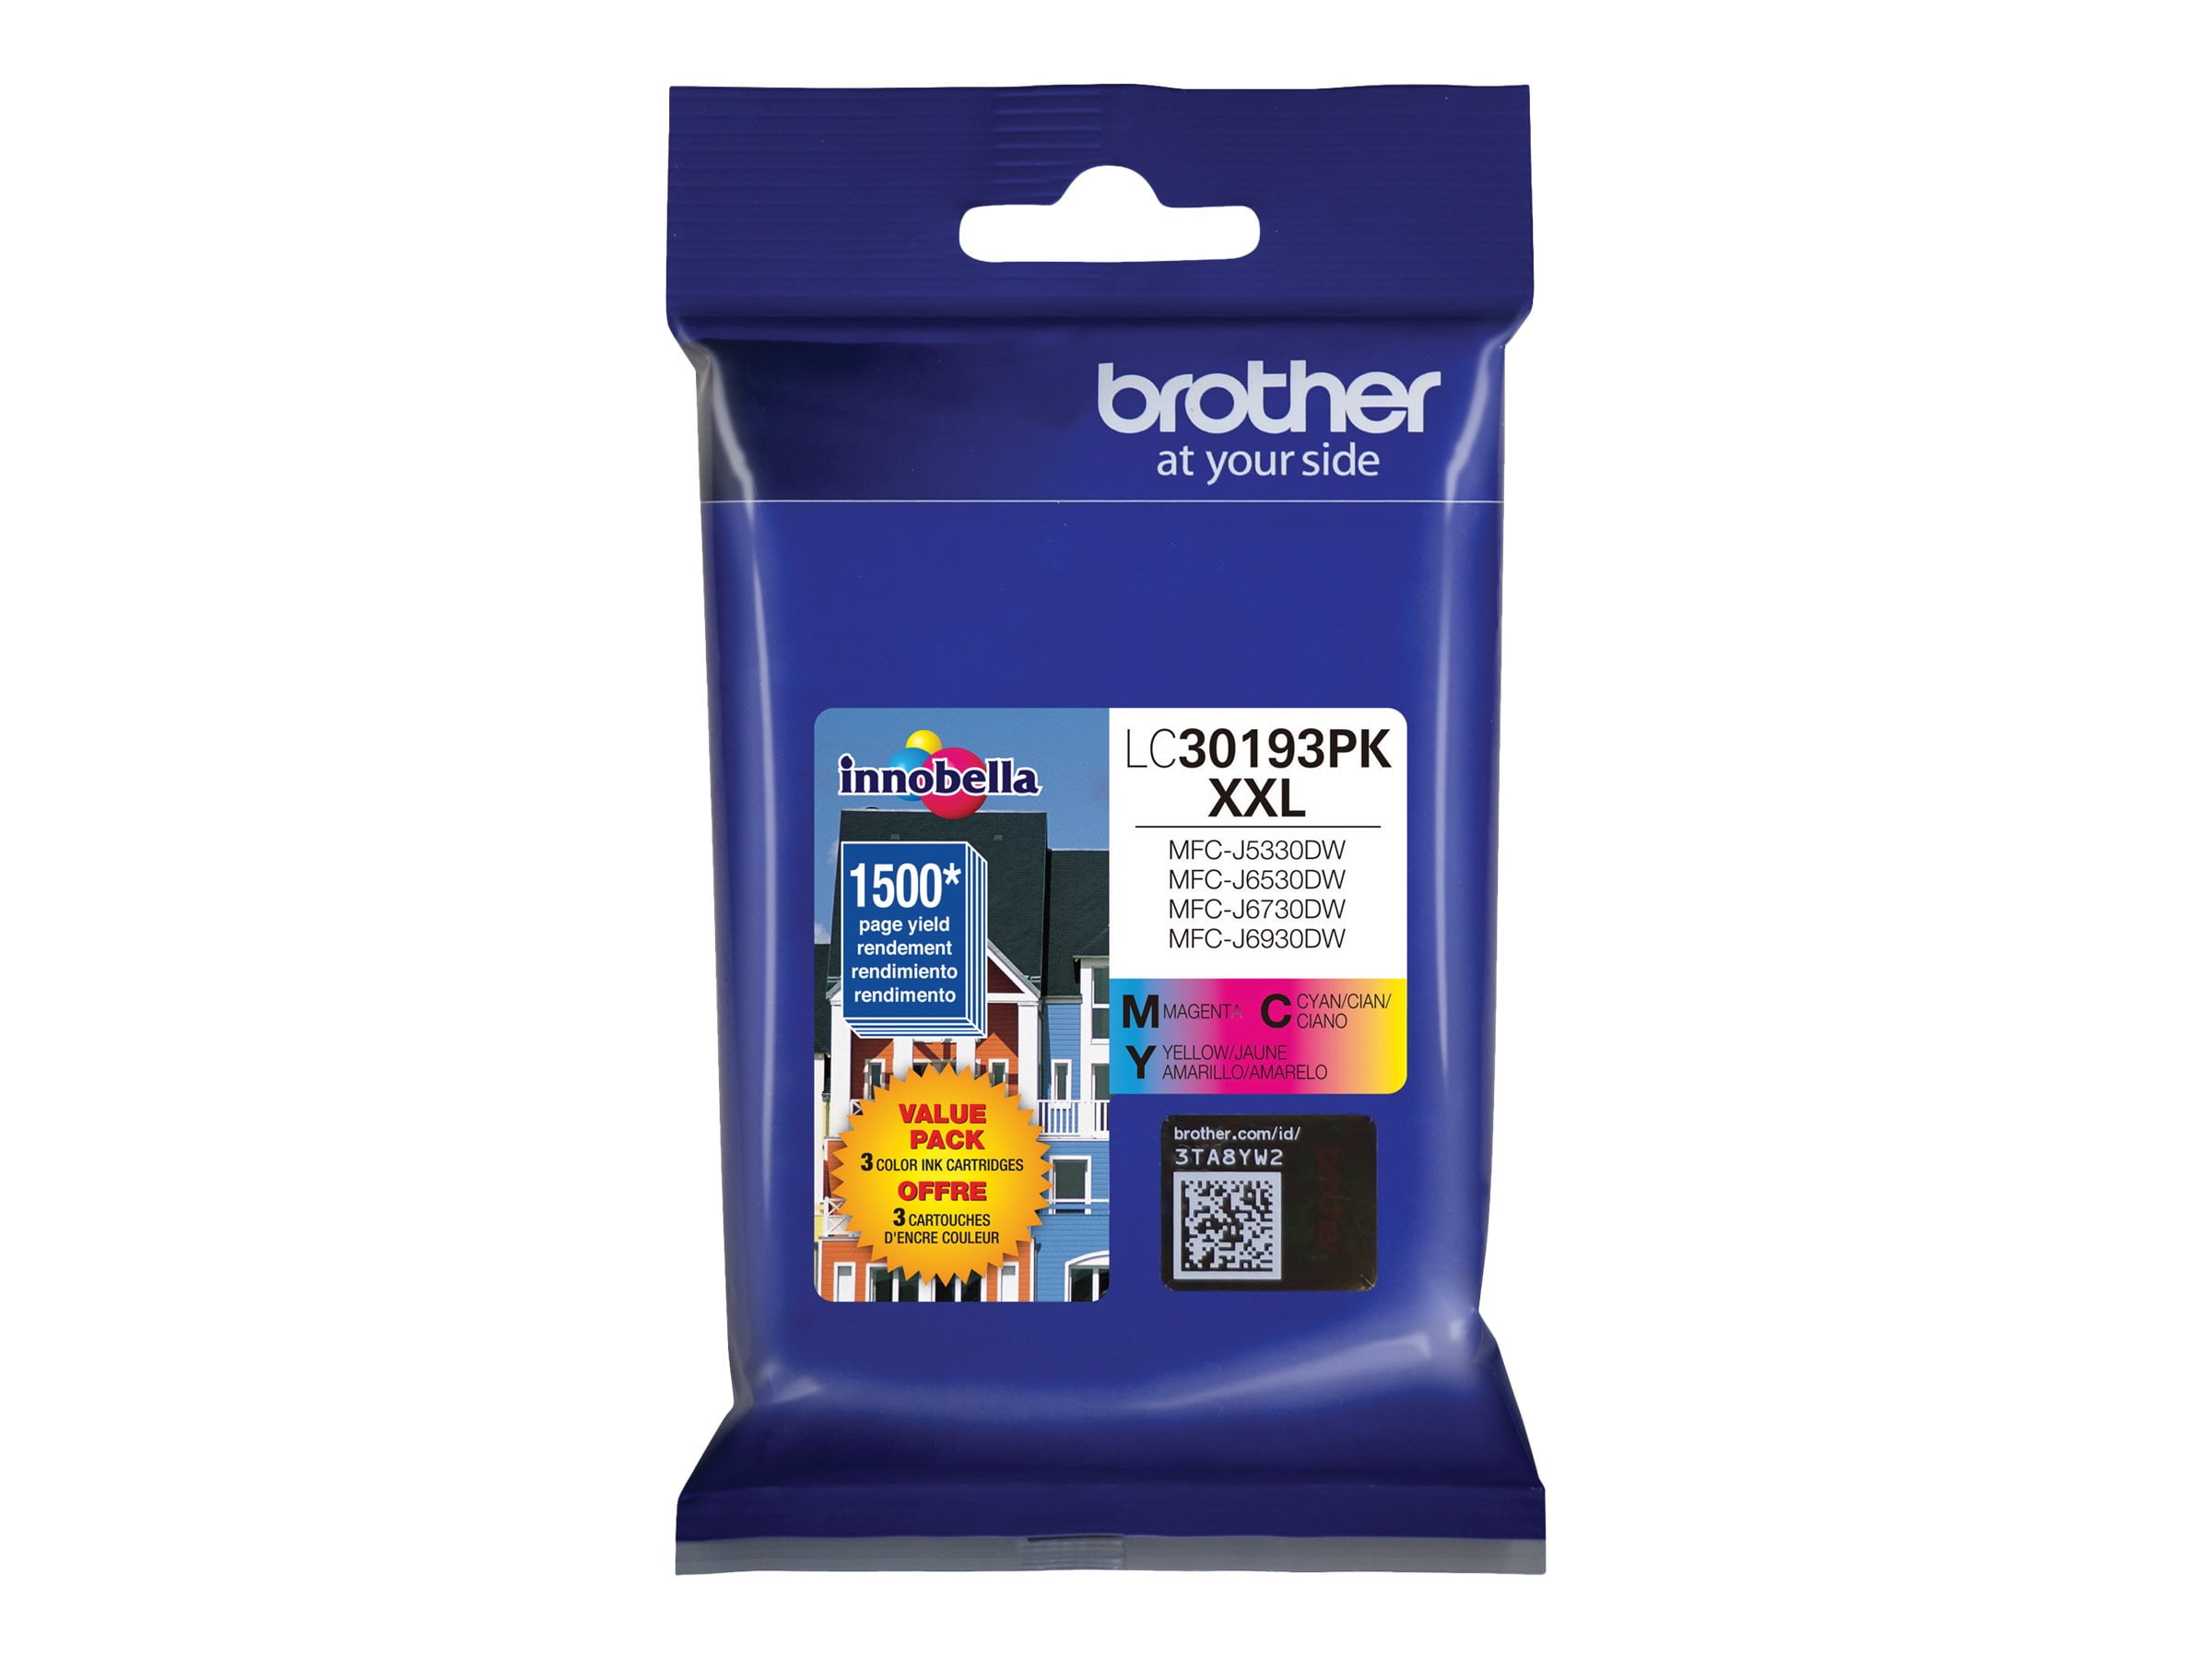 Brother XXL - - Super High Yield - yellow, cyan, magenta - original - ink cartridge - for Brother MFC-J5330DW, MFC-J6530DW, MFC-J6730DW; Business Smart Pro MFC-J6930DW